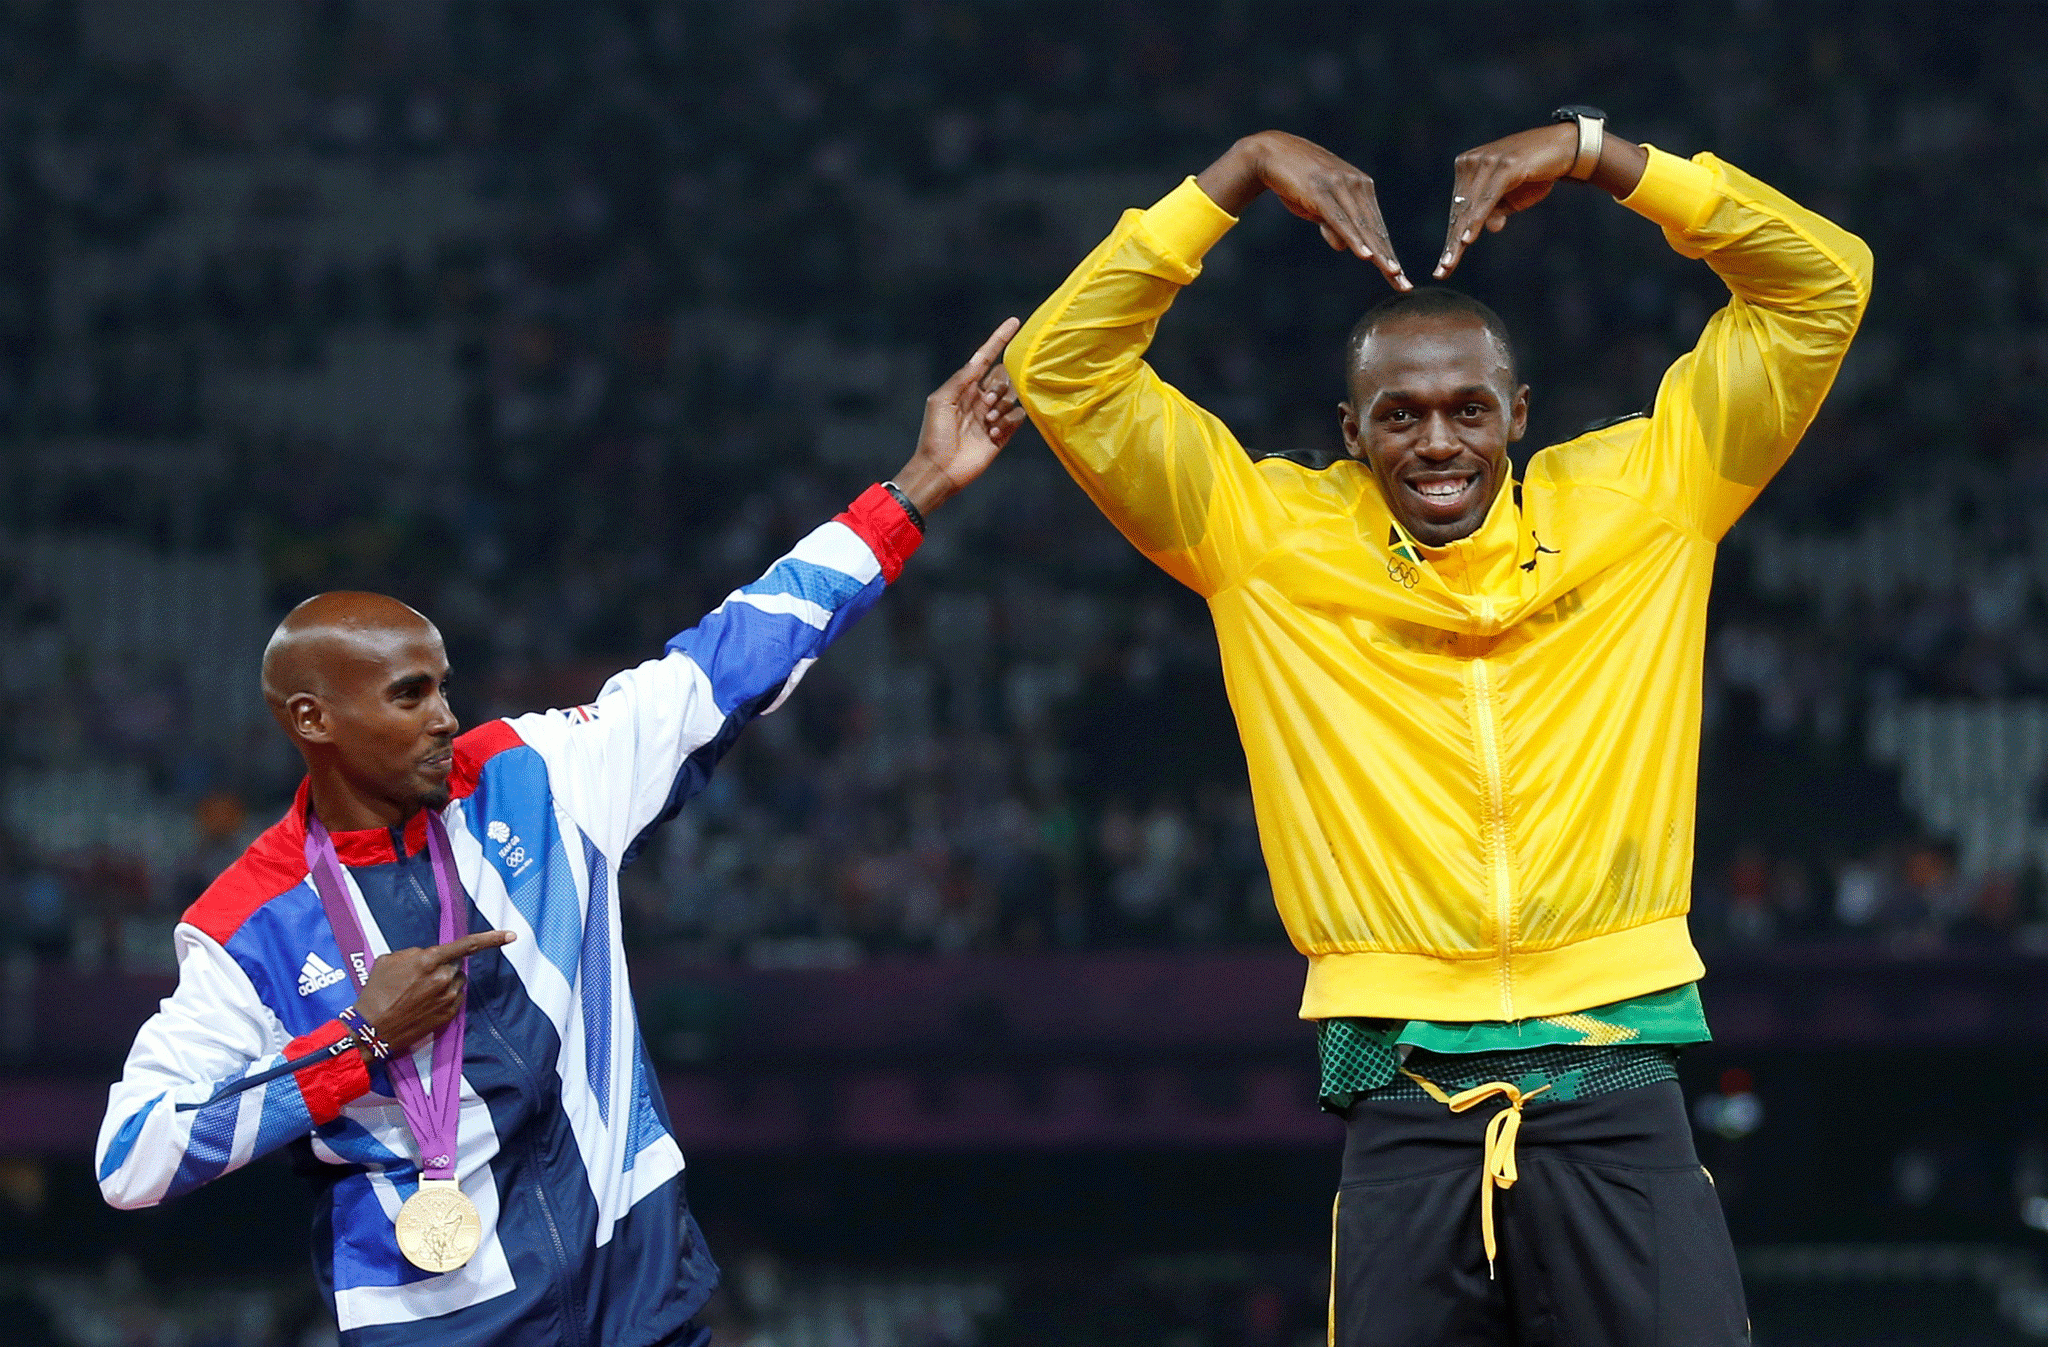 The unmatched exposure of the Olympic Games has made some athletes like Mo Farah and Usain Bolt millions through endorsements